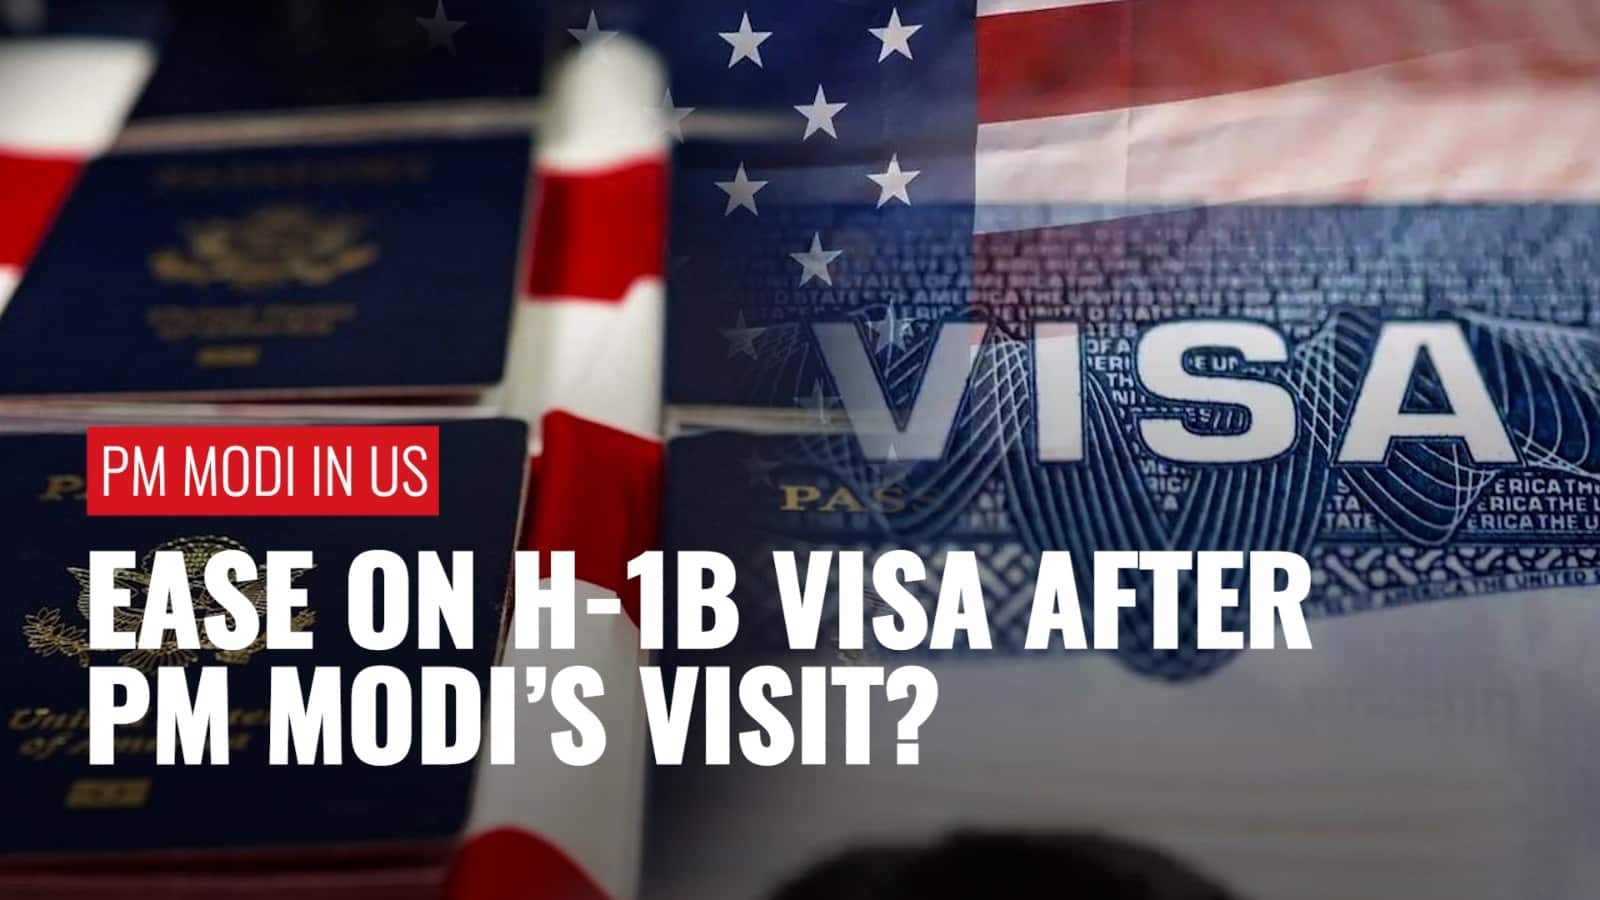 H1B visa rules to be revised? US to ease norms amid PM Modi's visit